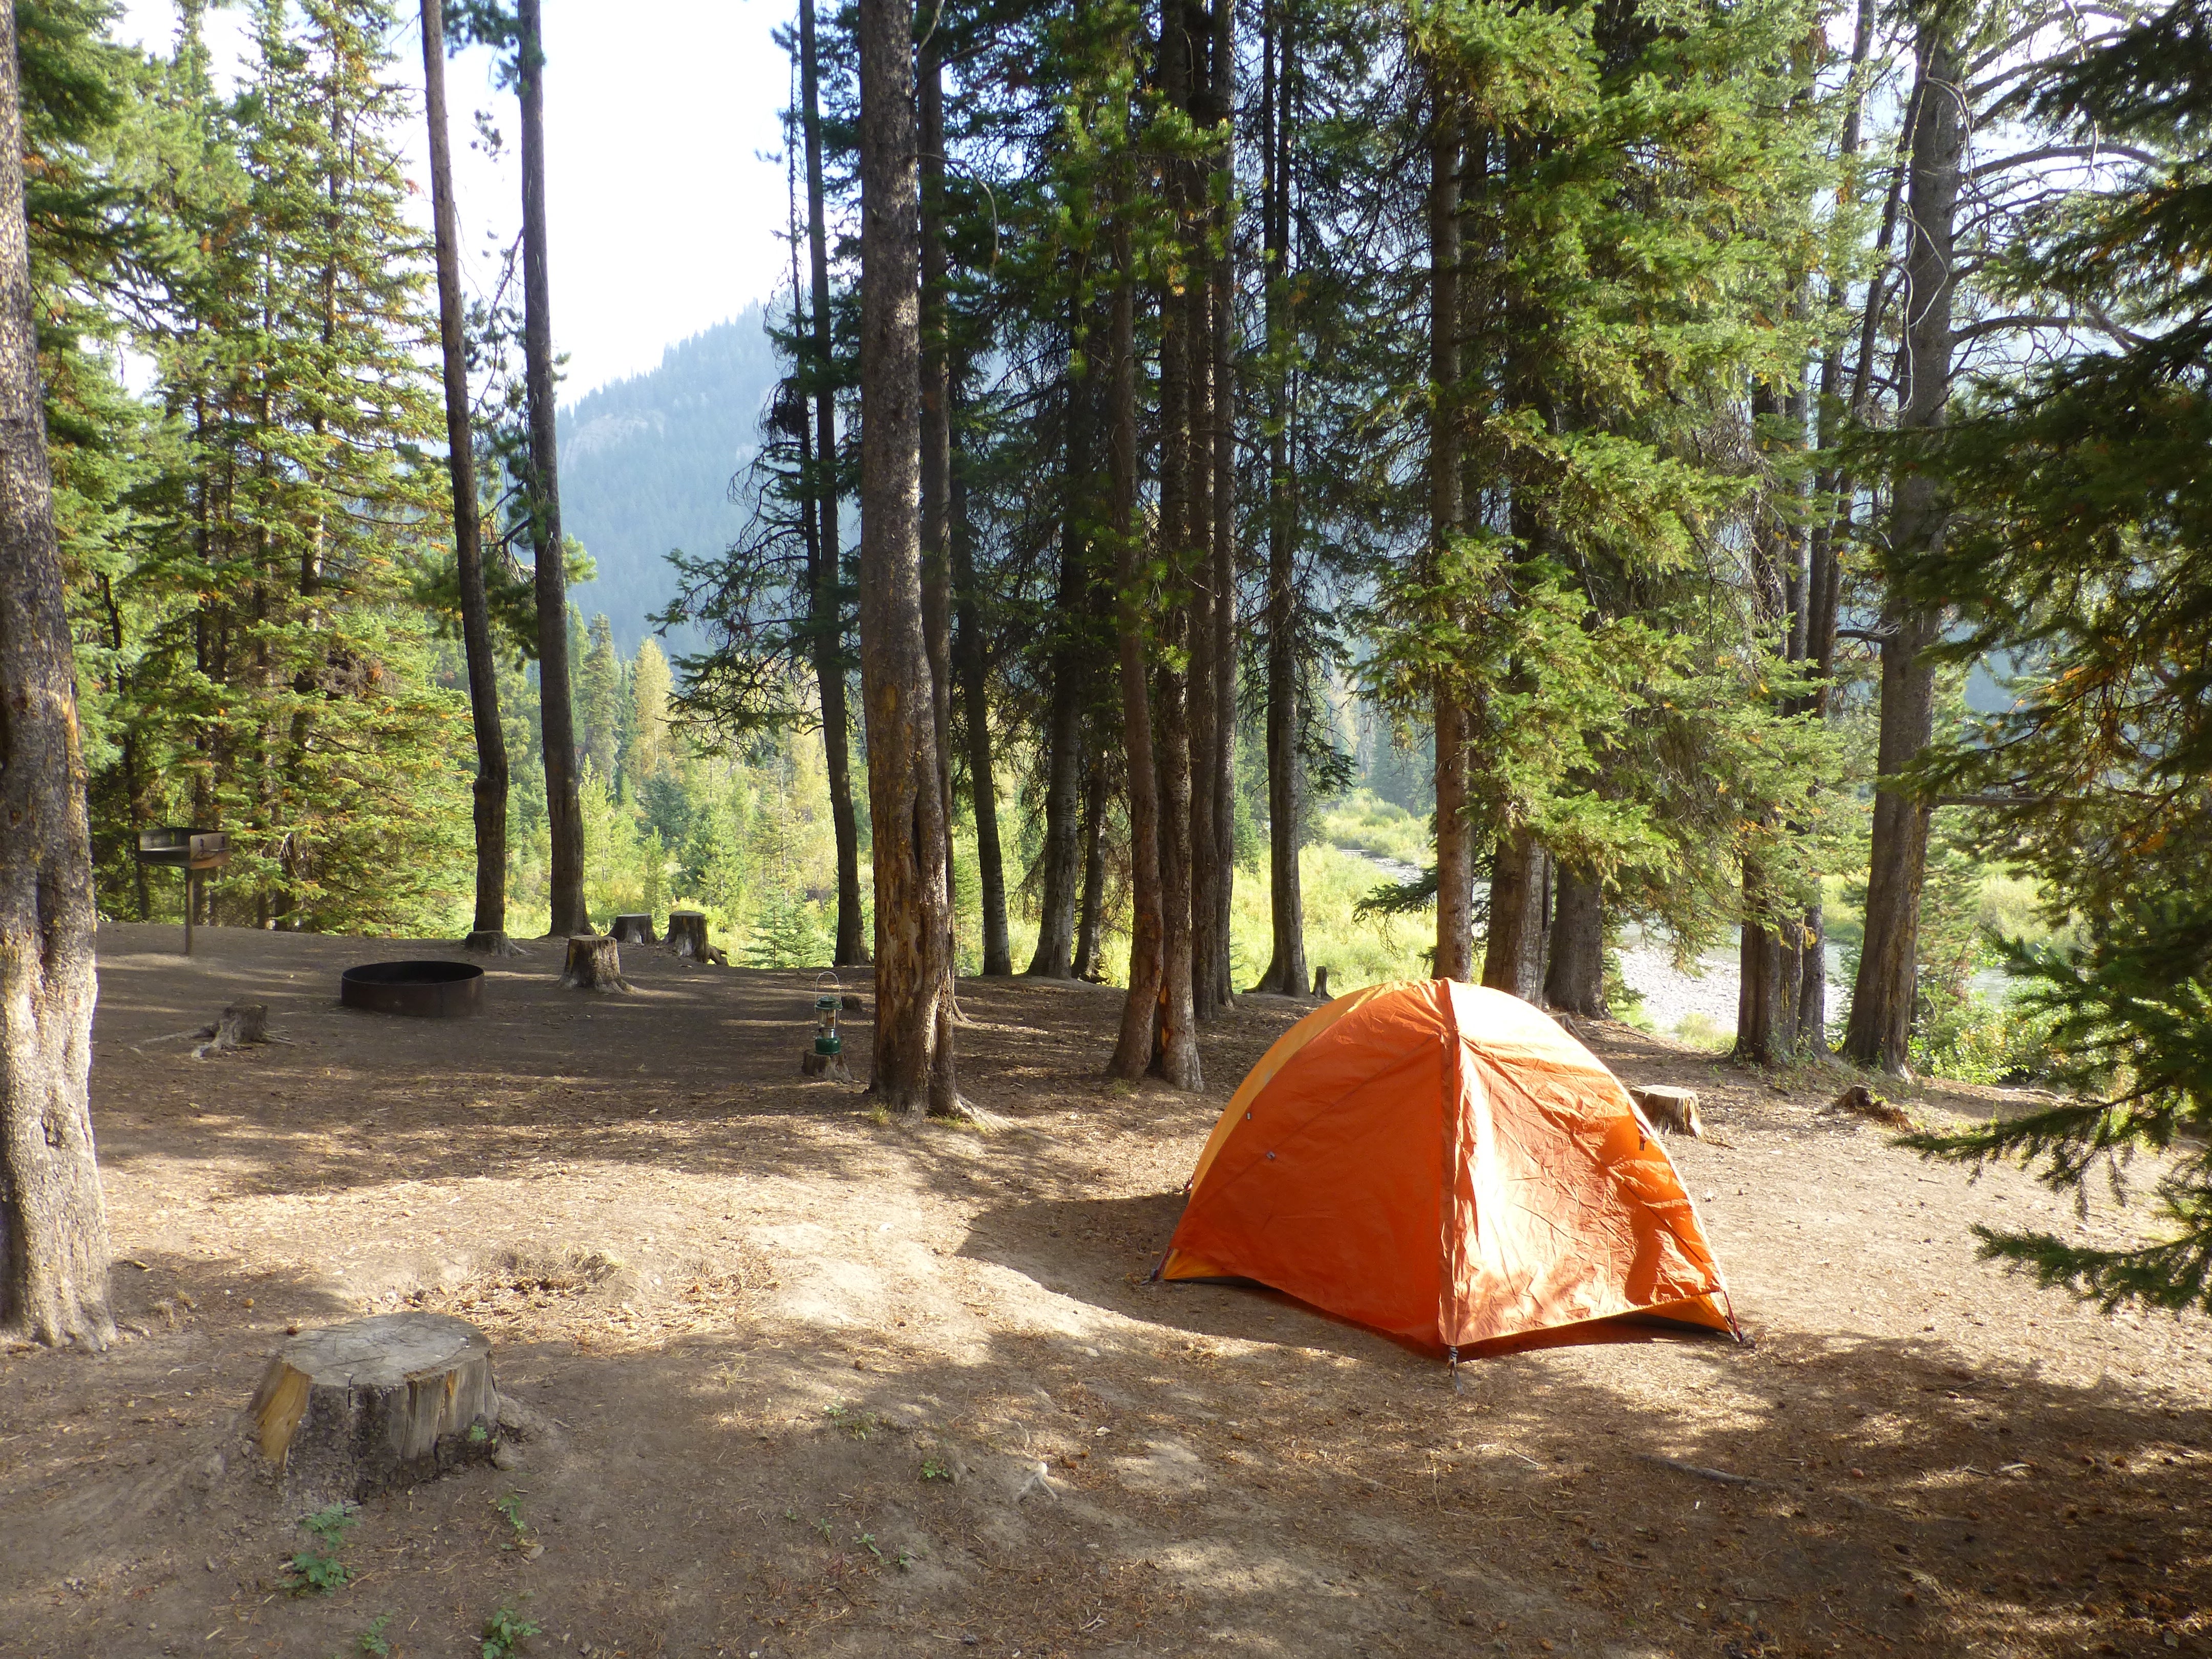 Camping in Bighorn National Forest